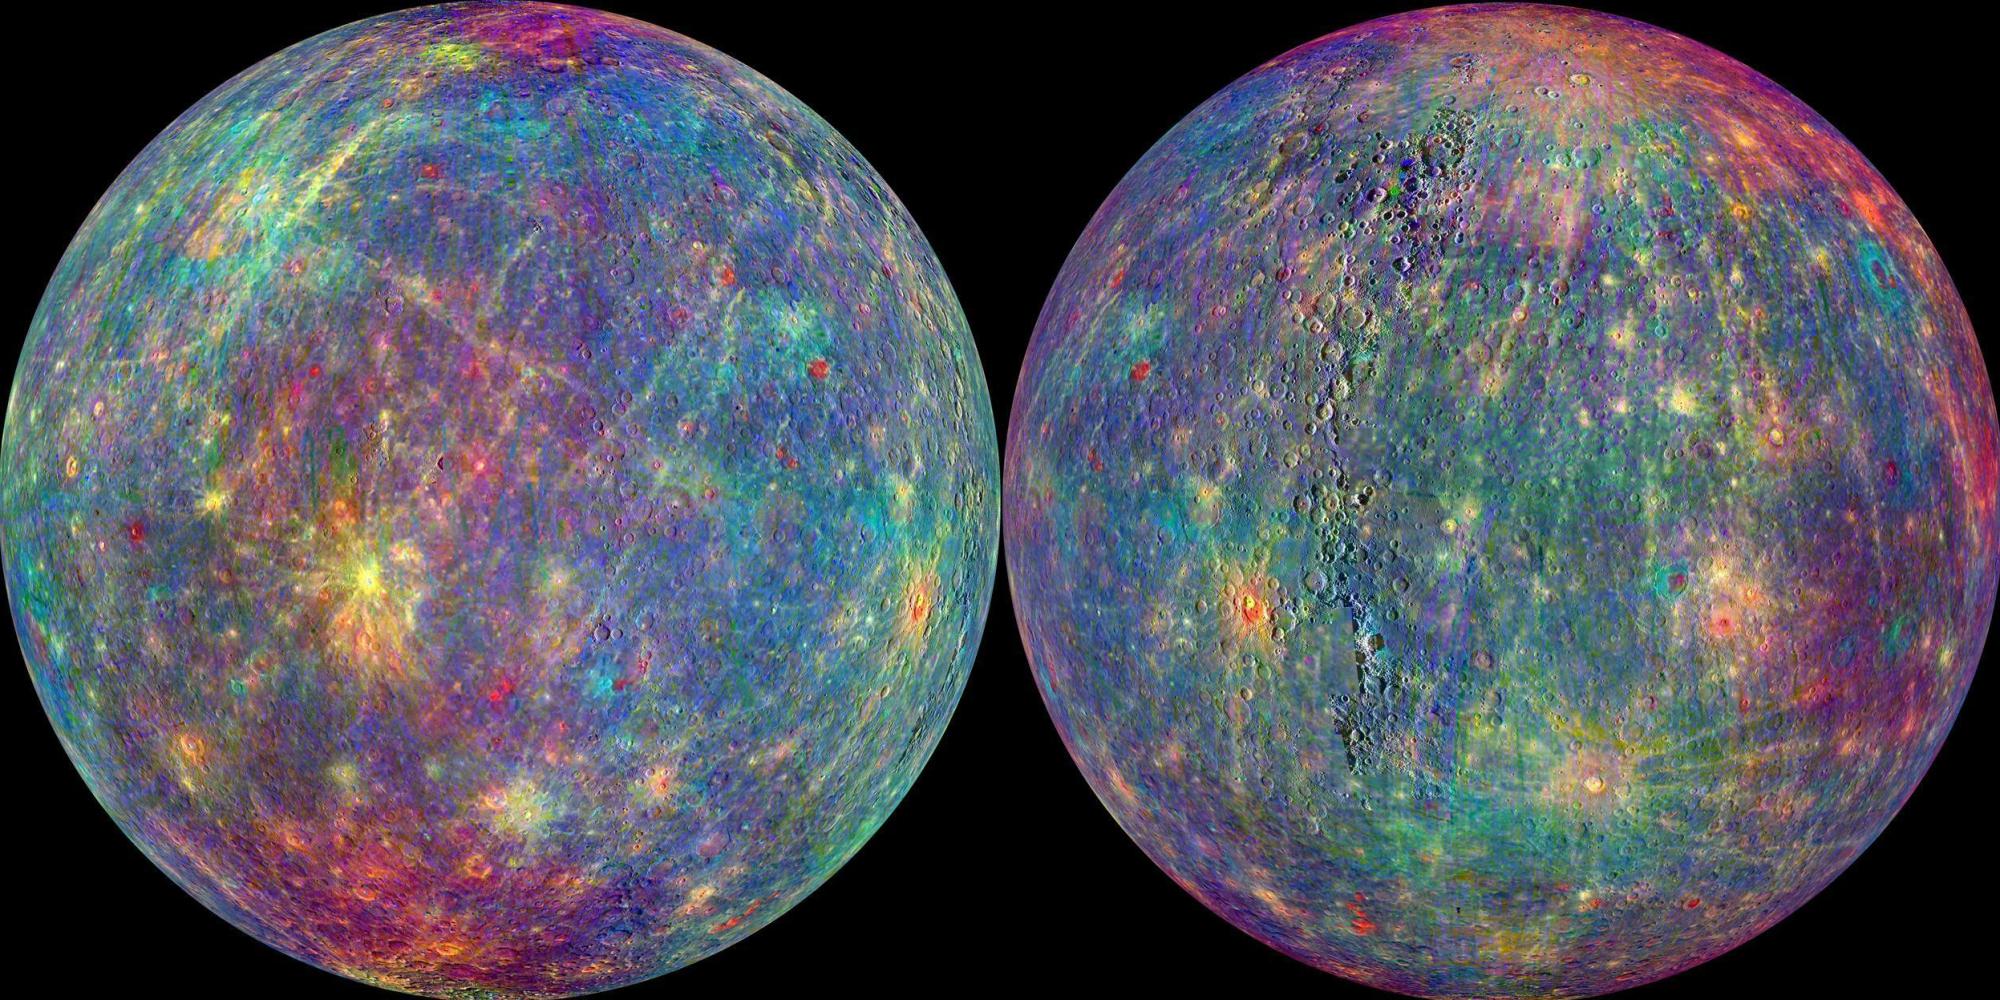 New Mercury Images Show The Planet In Stunning Colour | HuffPost UK